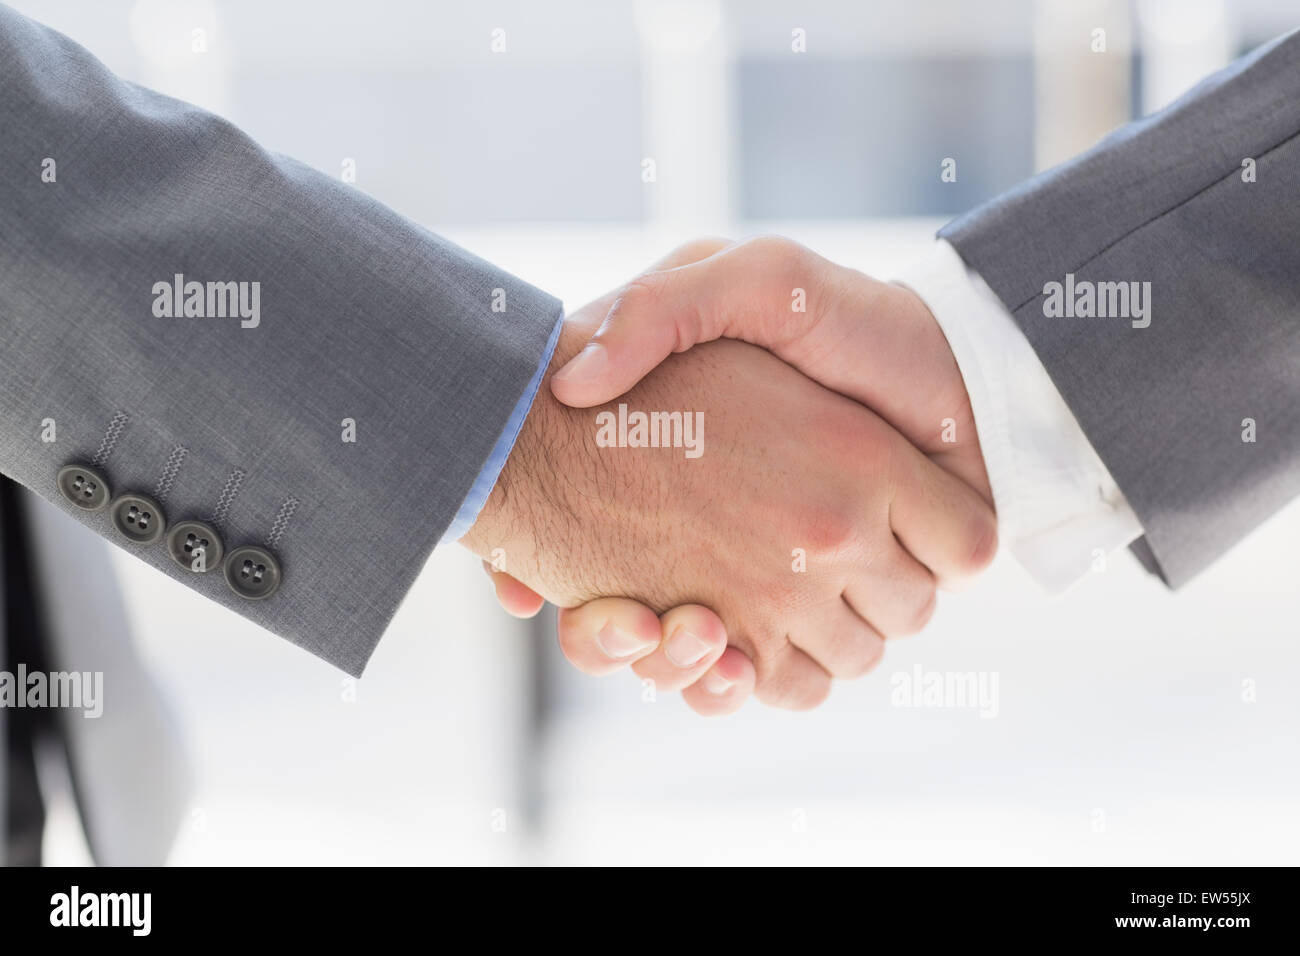 Business colleagues greeting each other Stock Photo